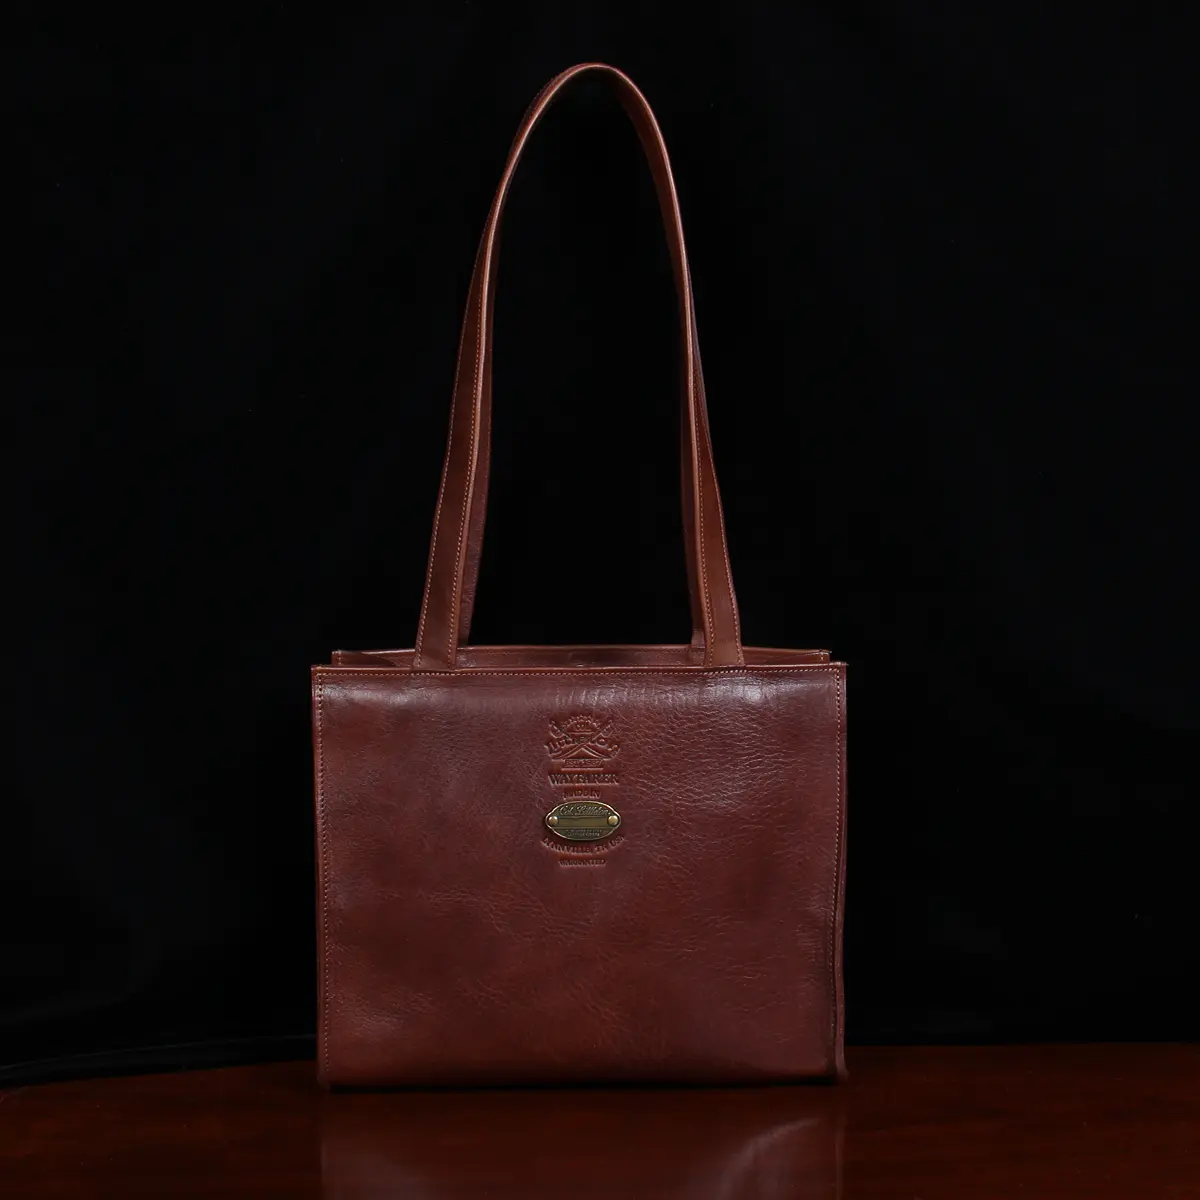 Wayfarer Tote showing the front side with straps